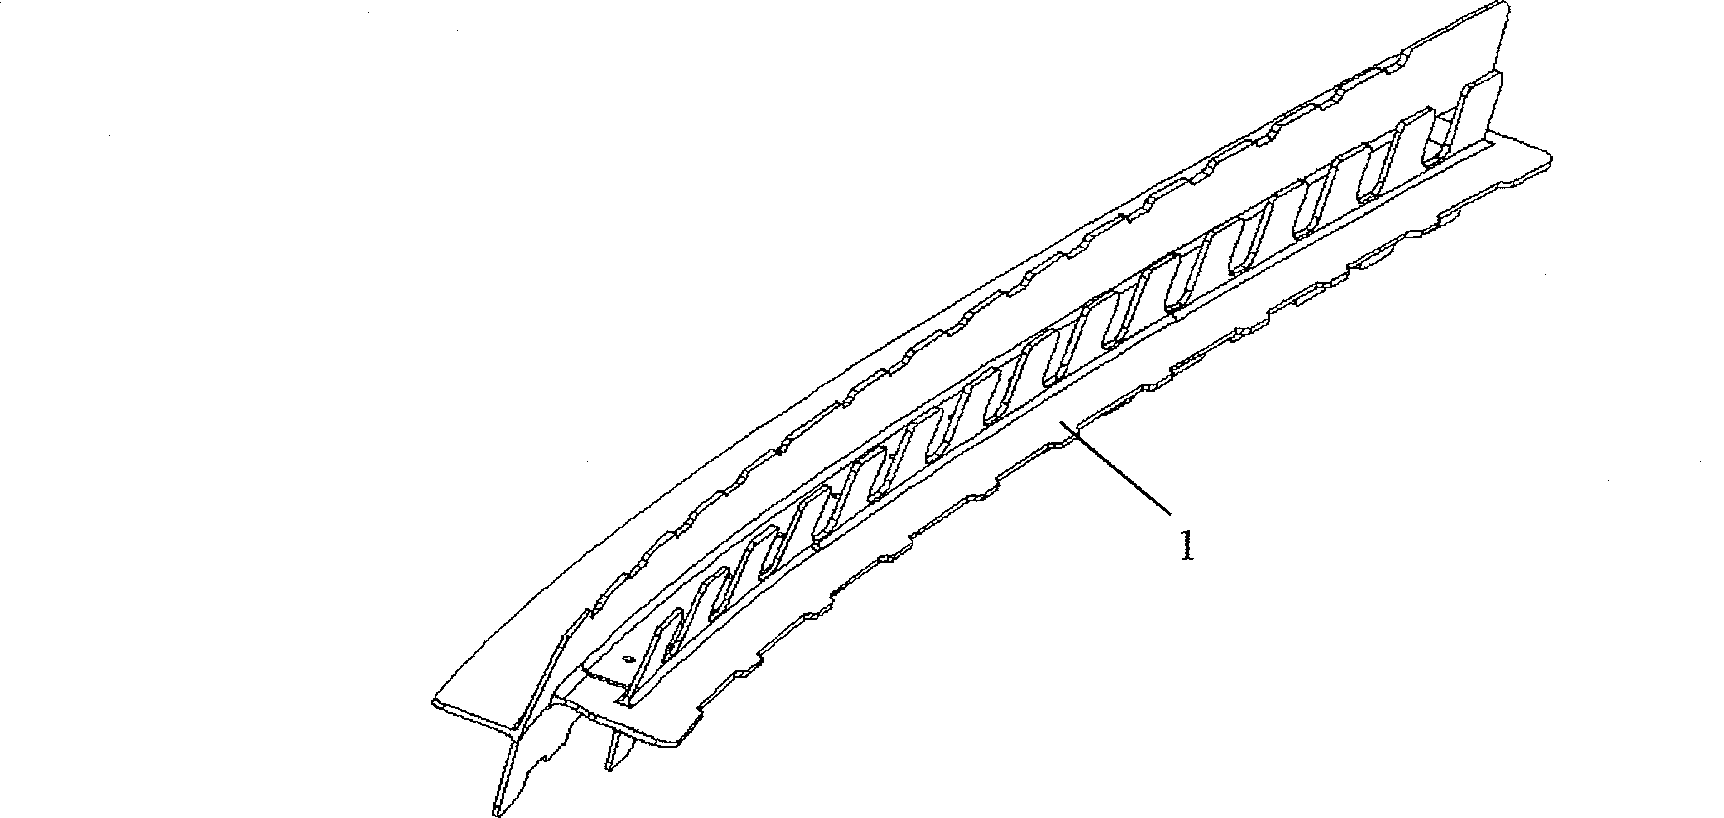 Numerically controlled processing method for plane wing rib beam part